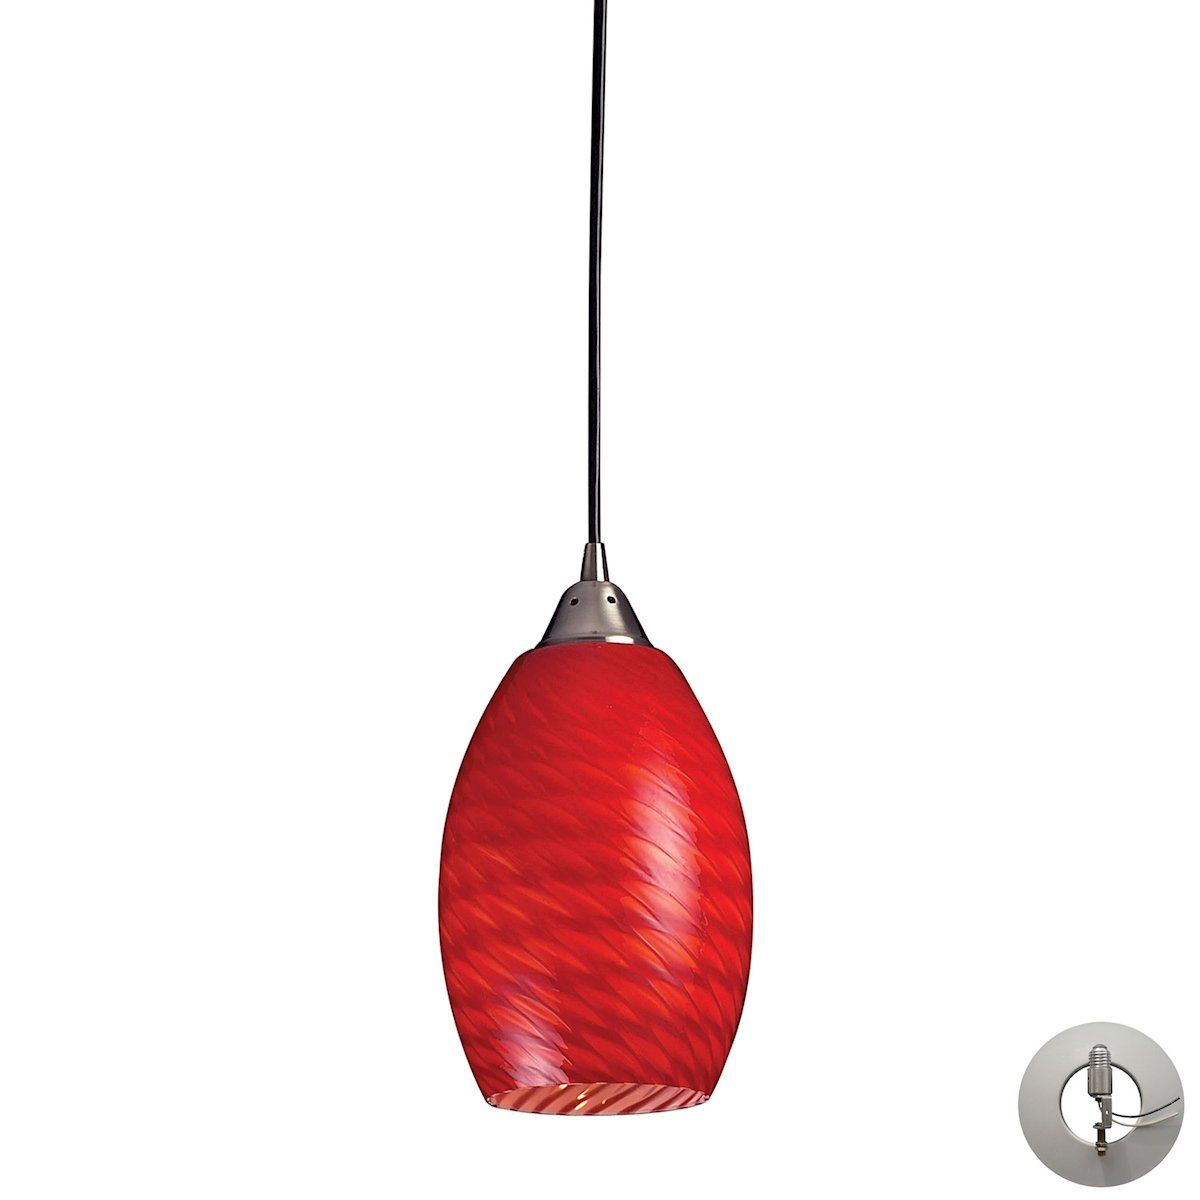 Mulinello Pendant In Satin Nickel And Scarlet Red Glass - Includes Recessed Lighting Kit Ceiling Elk Lighting 